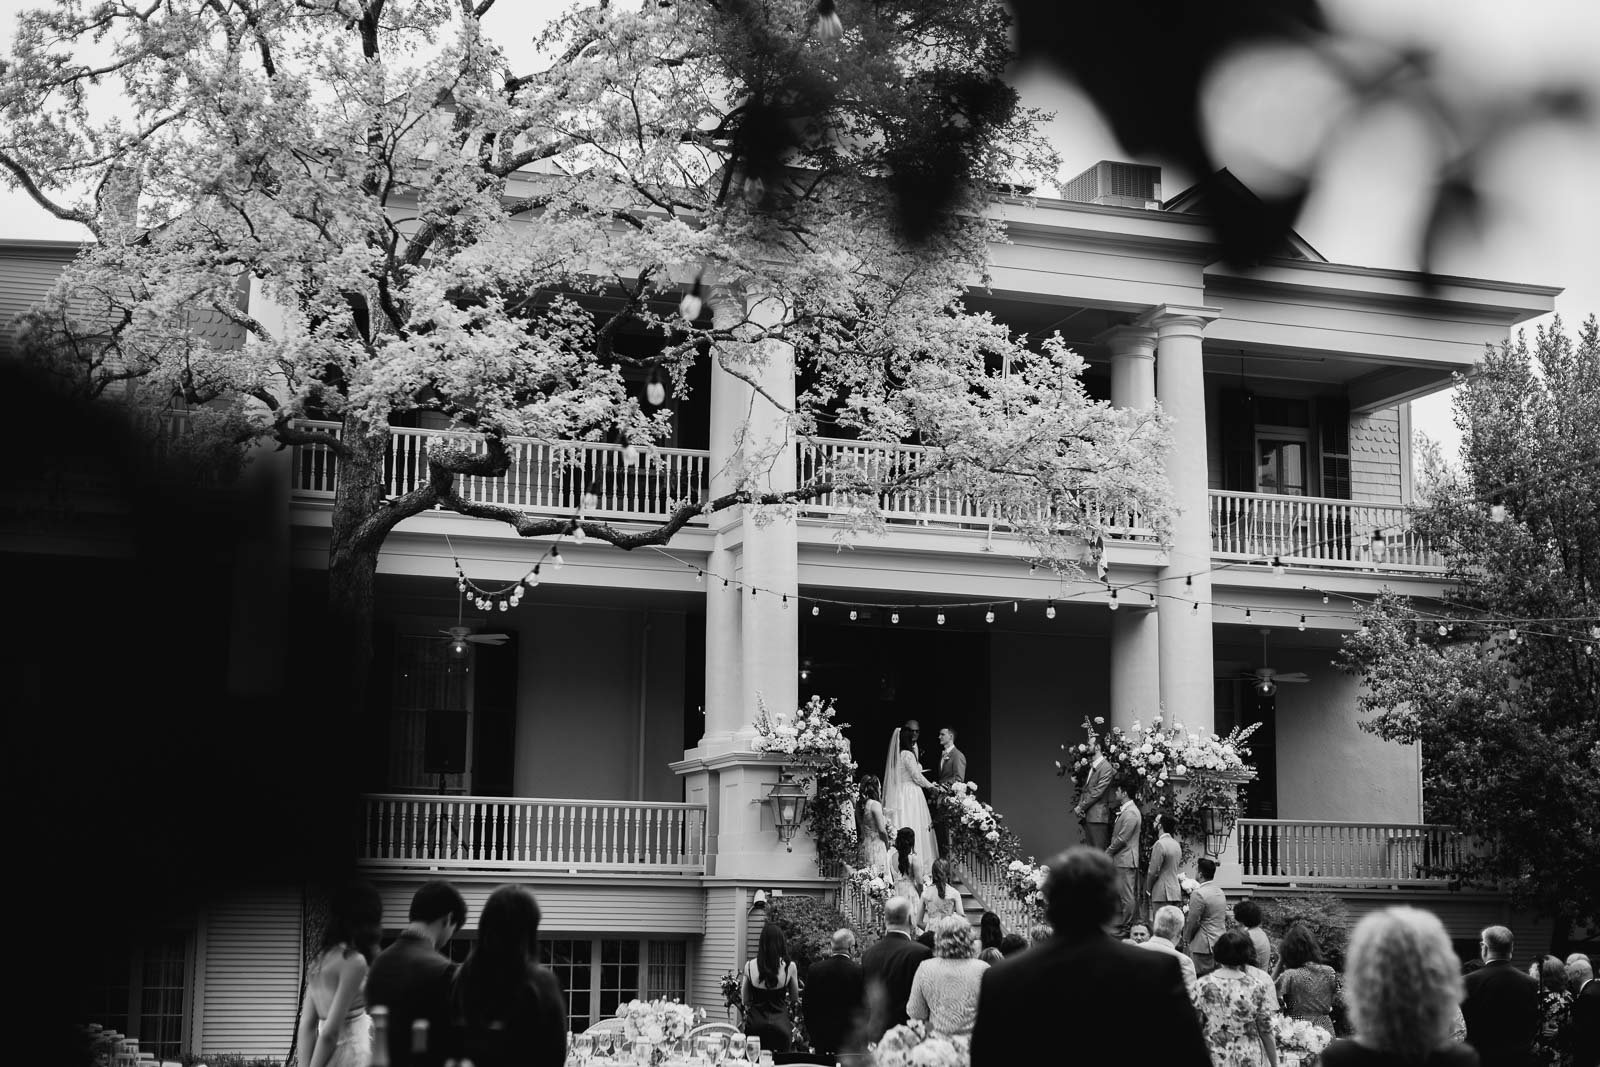 A wide angle view in monochrome photograph from the back of the ceremony looking towards The Argyle as a bride and groom